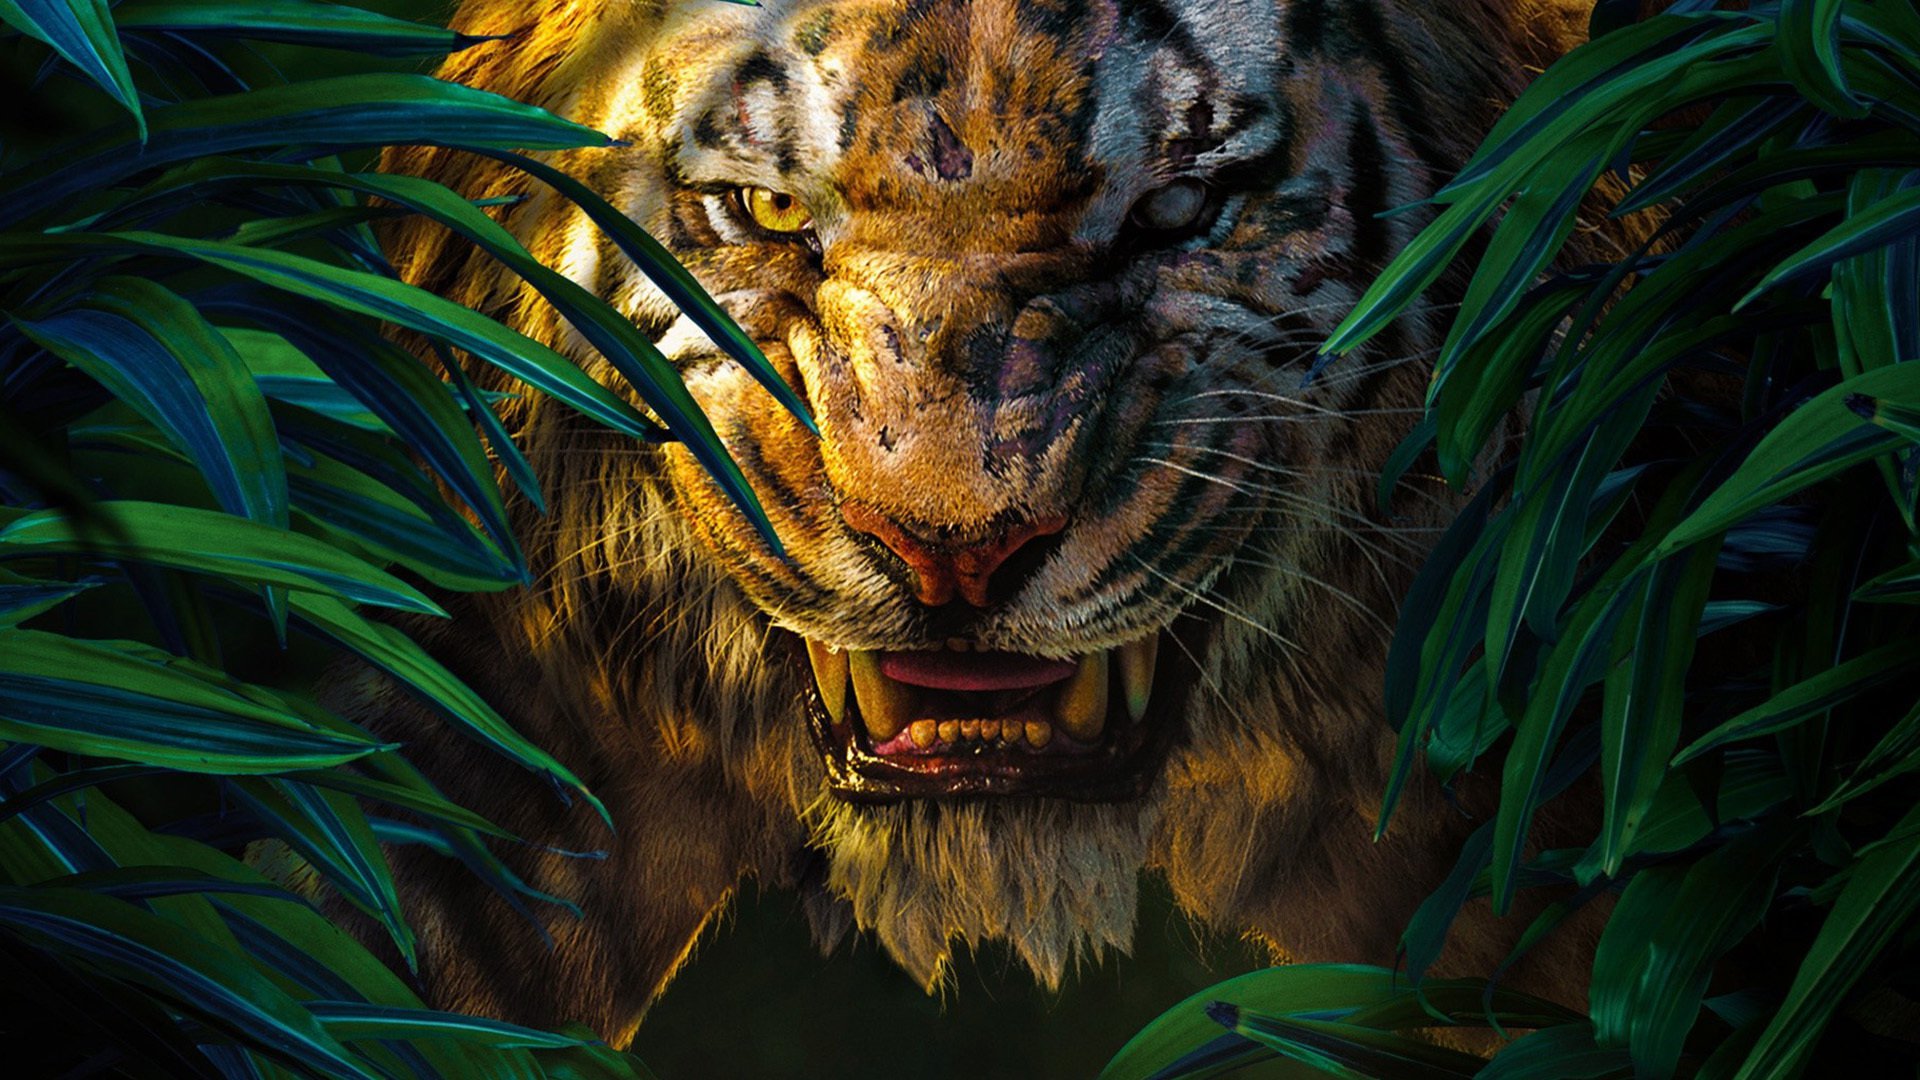 The Jungle Book (2016) Wallpapers